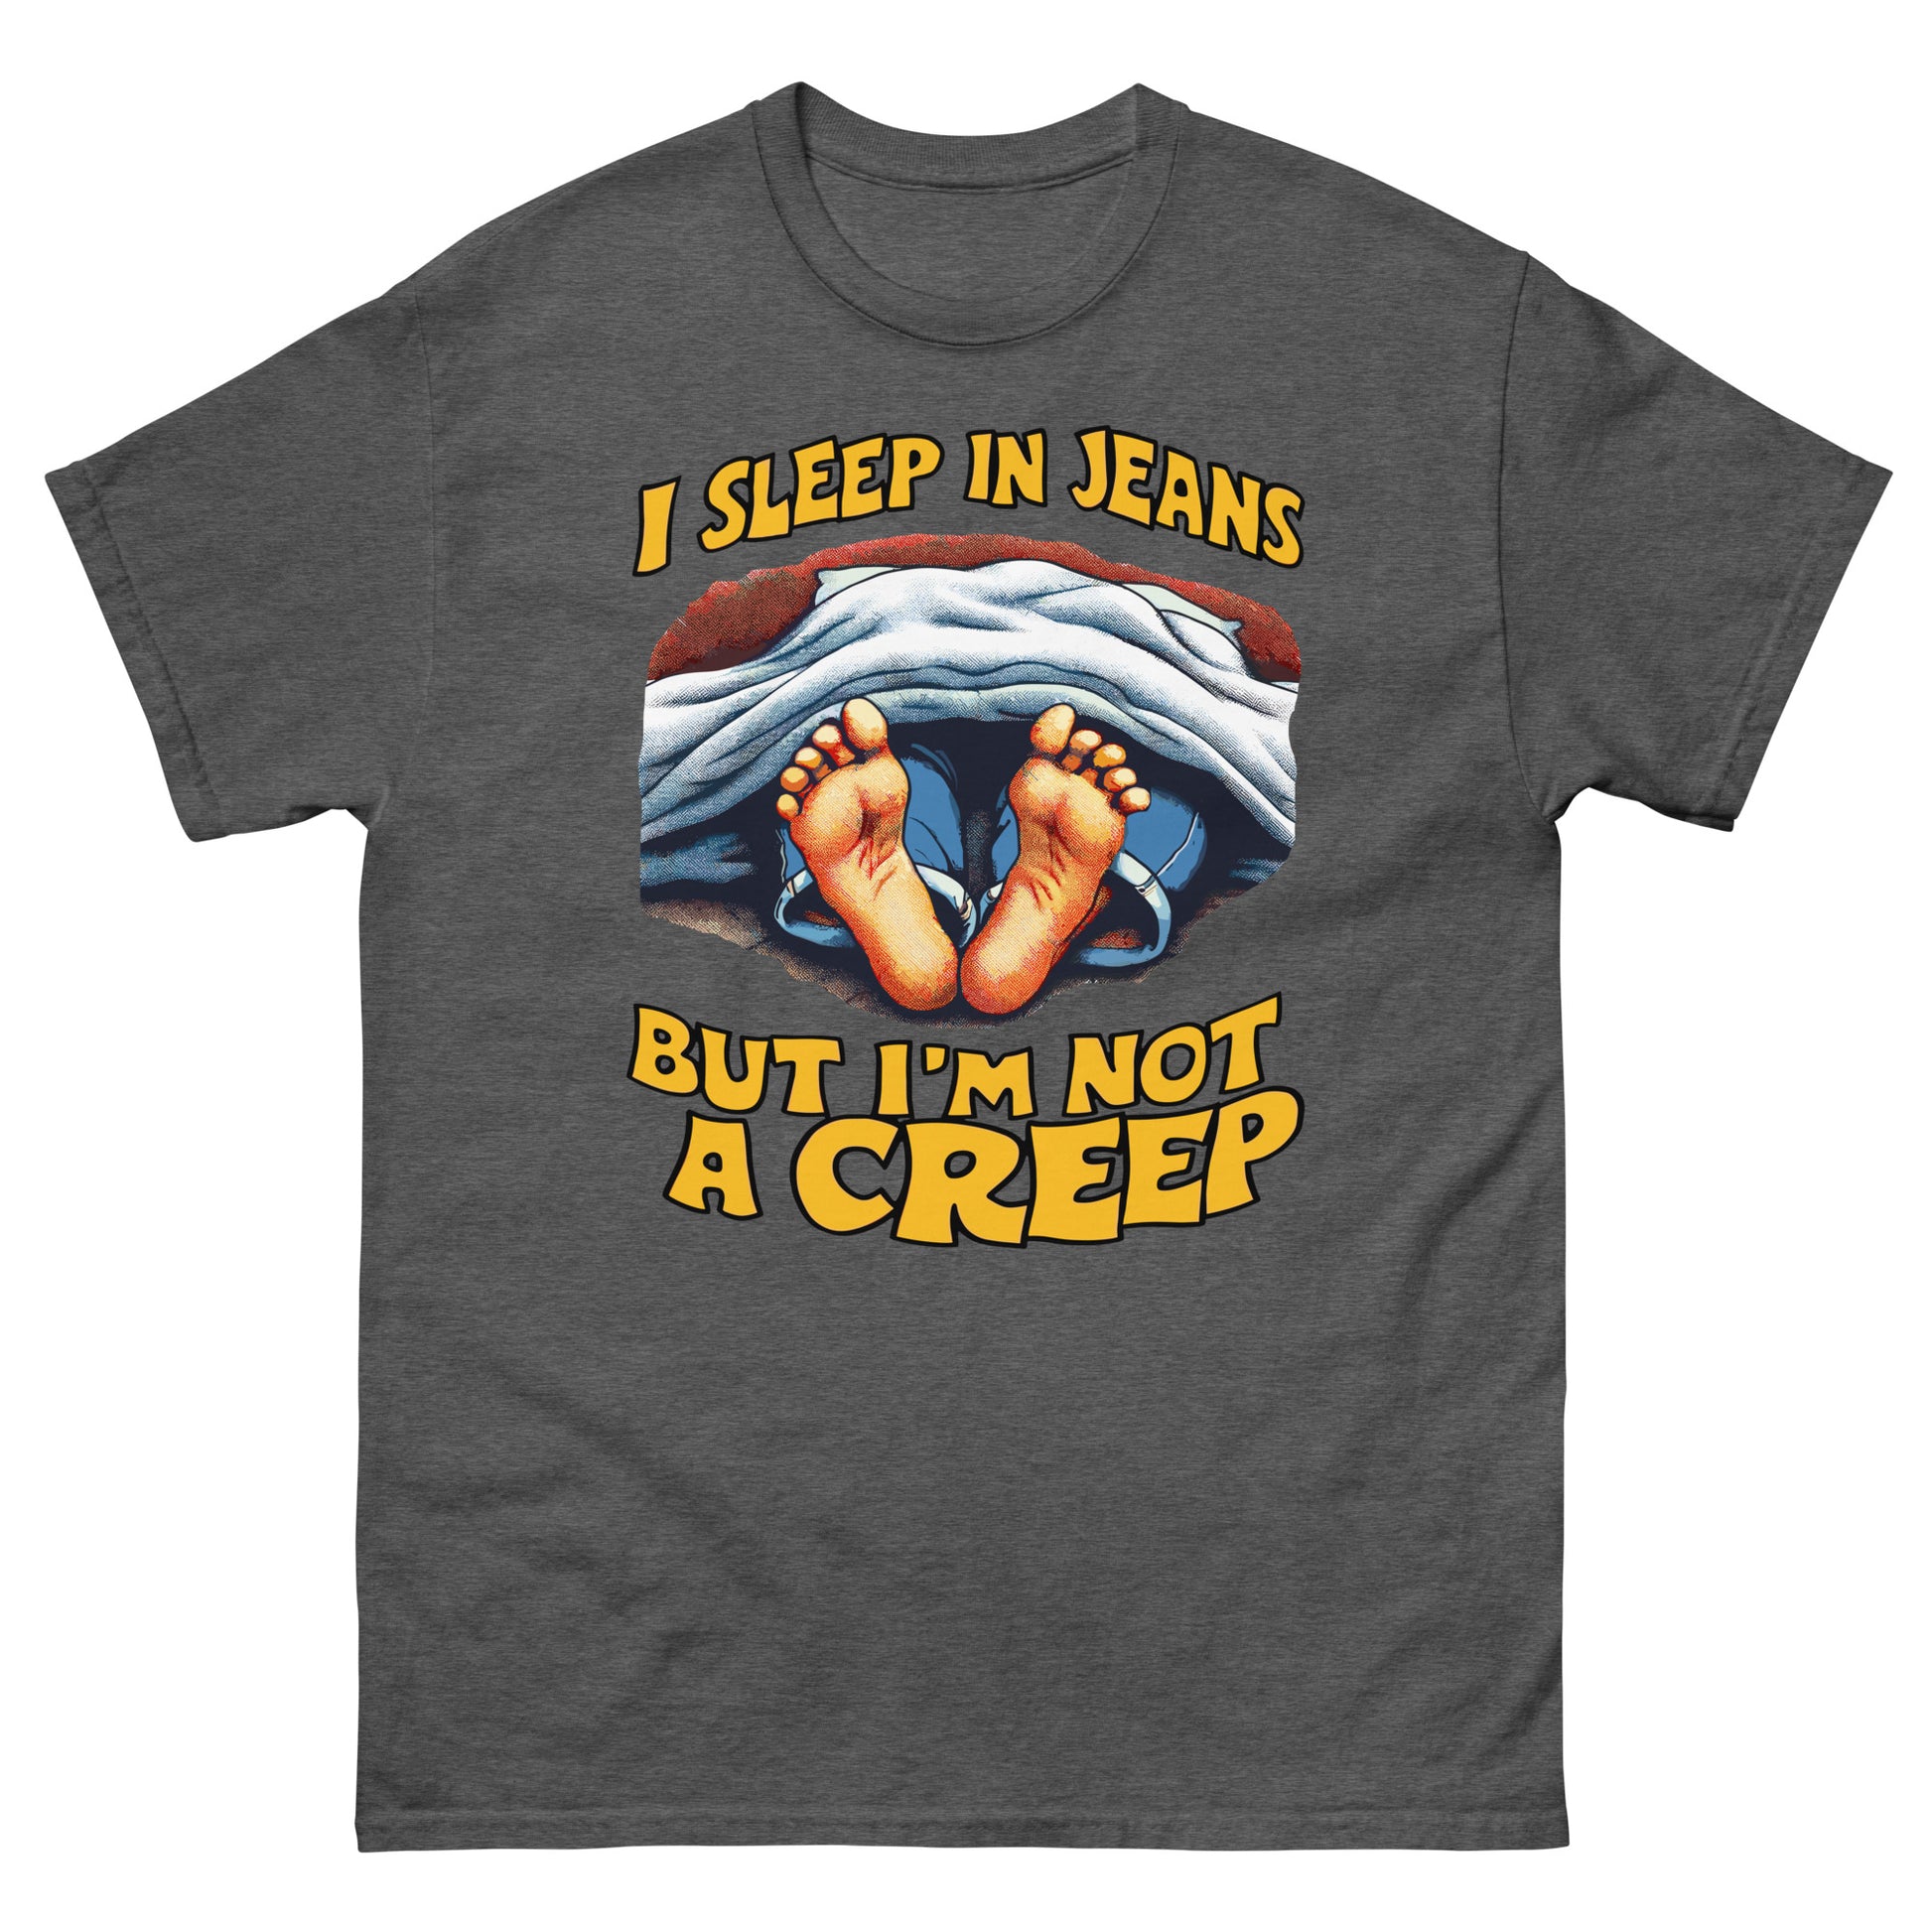 I sleep in jeans but im not a creep design printed on t-shirt by Whistler Shirts